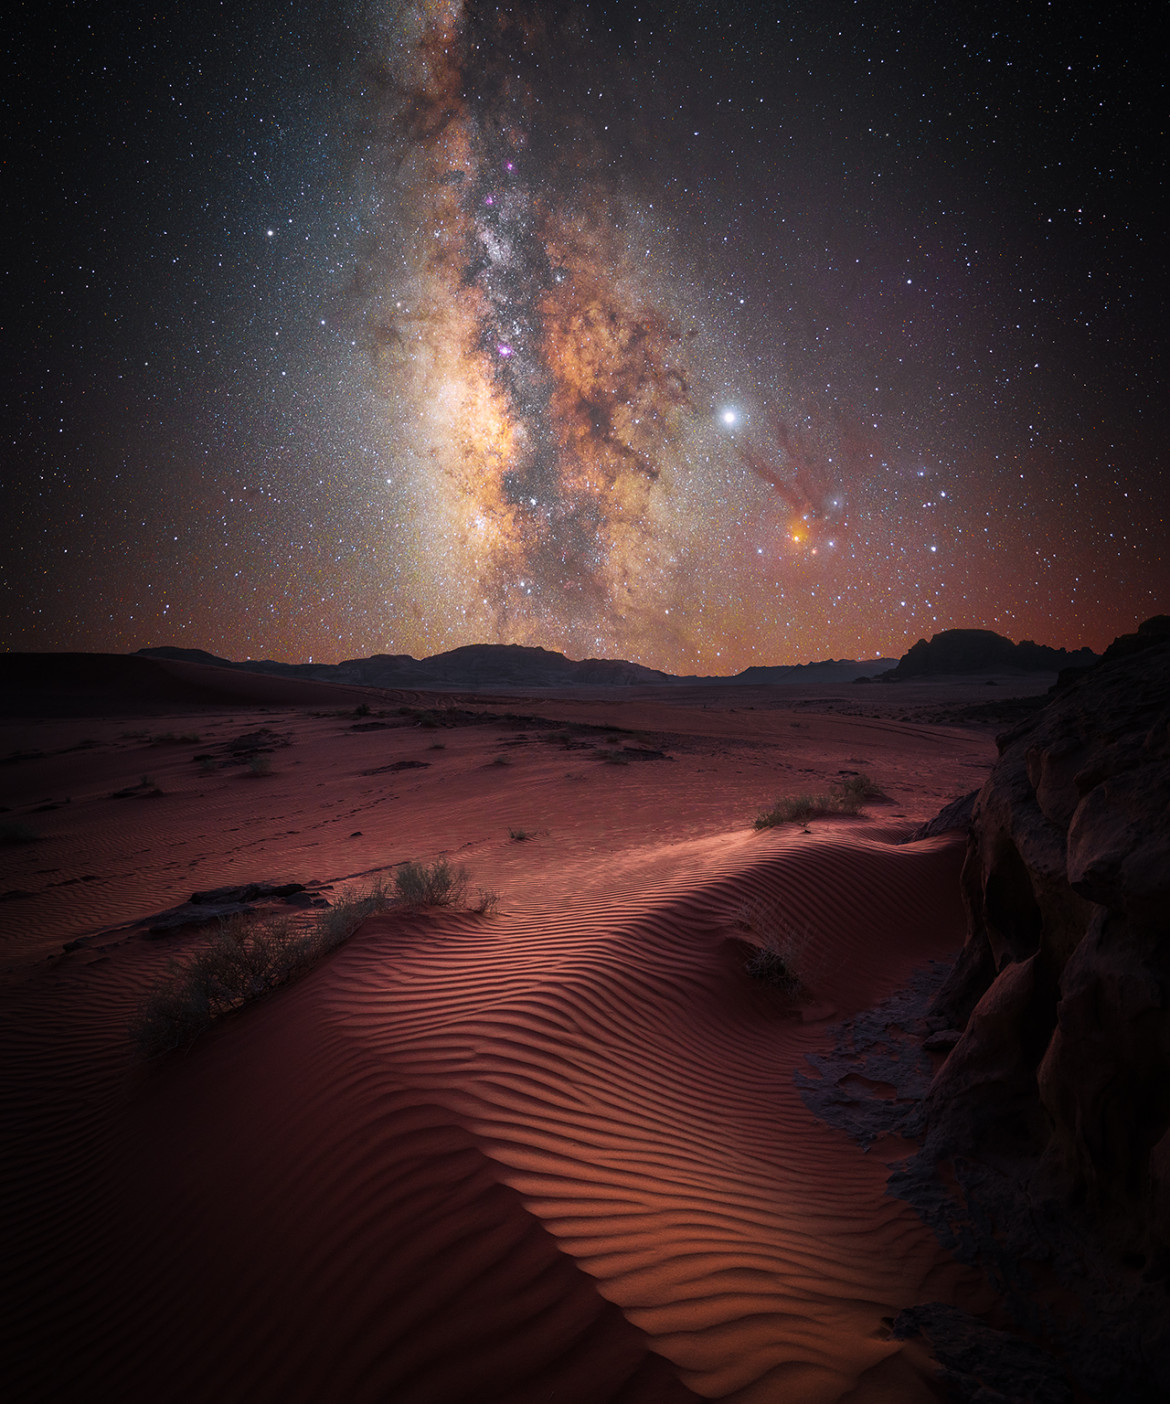 fot. Stefan Liebermann, "Desrt Magic", 2. miejsce w kat. Scyscapes / Insight Investment Astronomy Photographer of the Year 2020